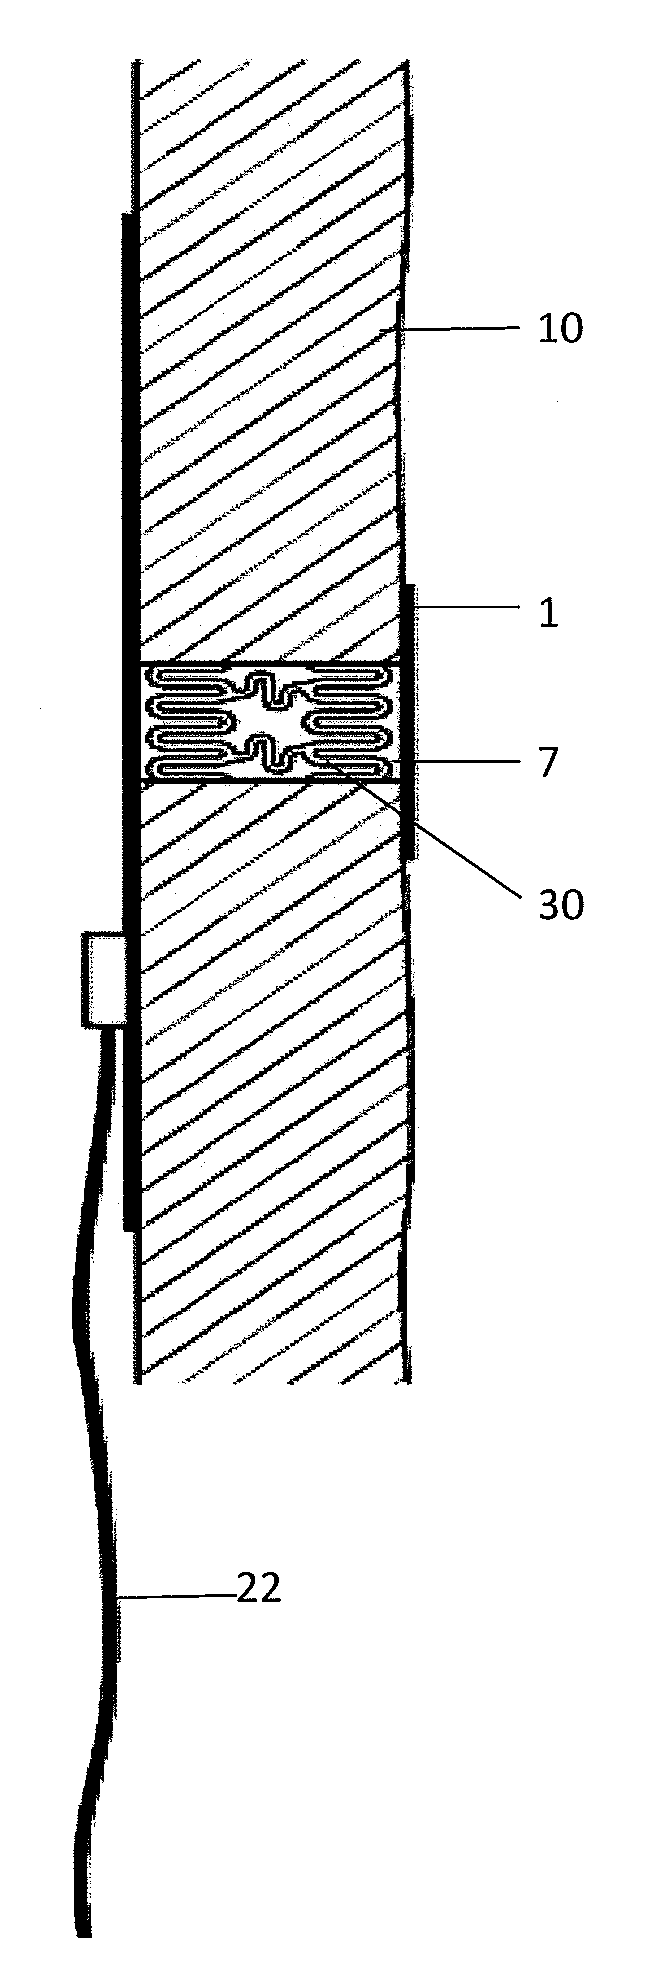 Implantable indifferent reference electrode pole